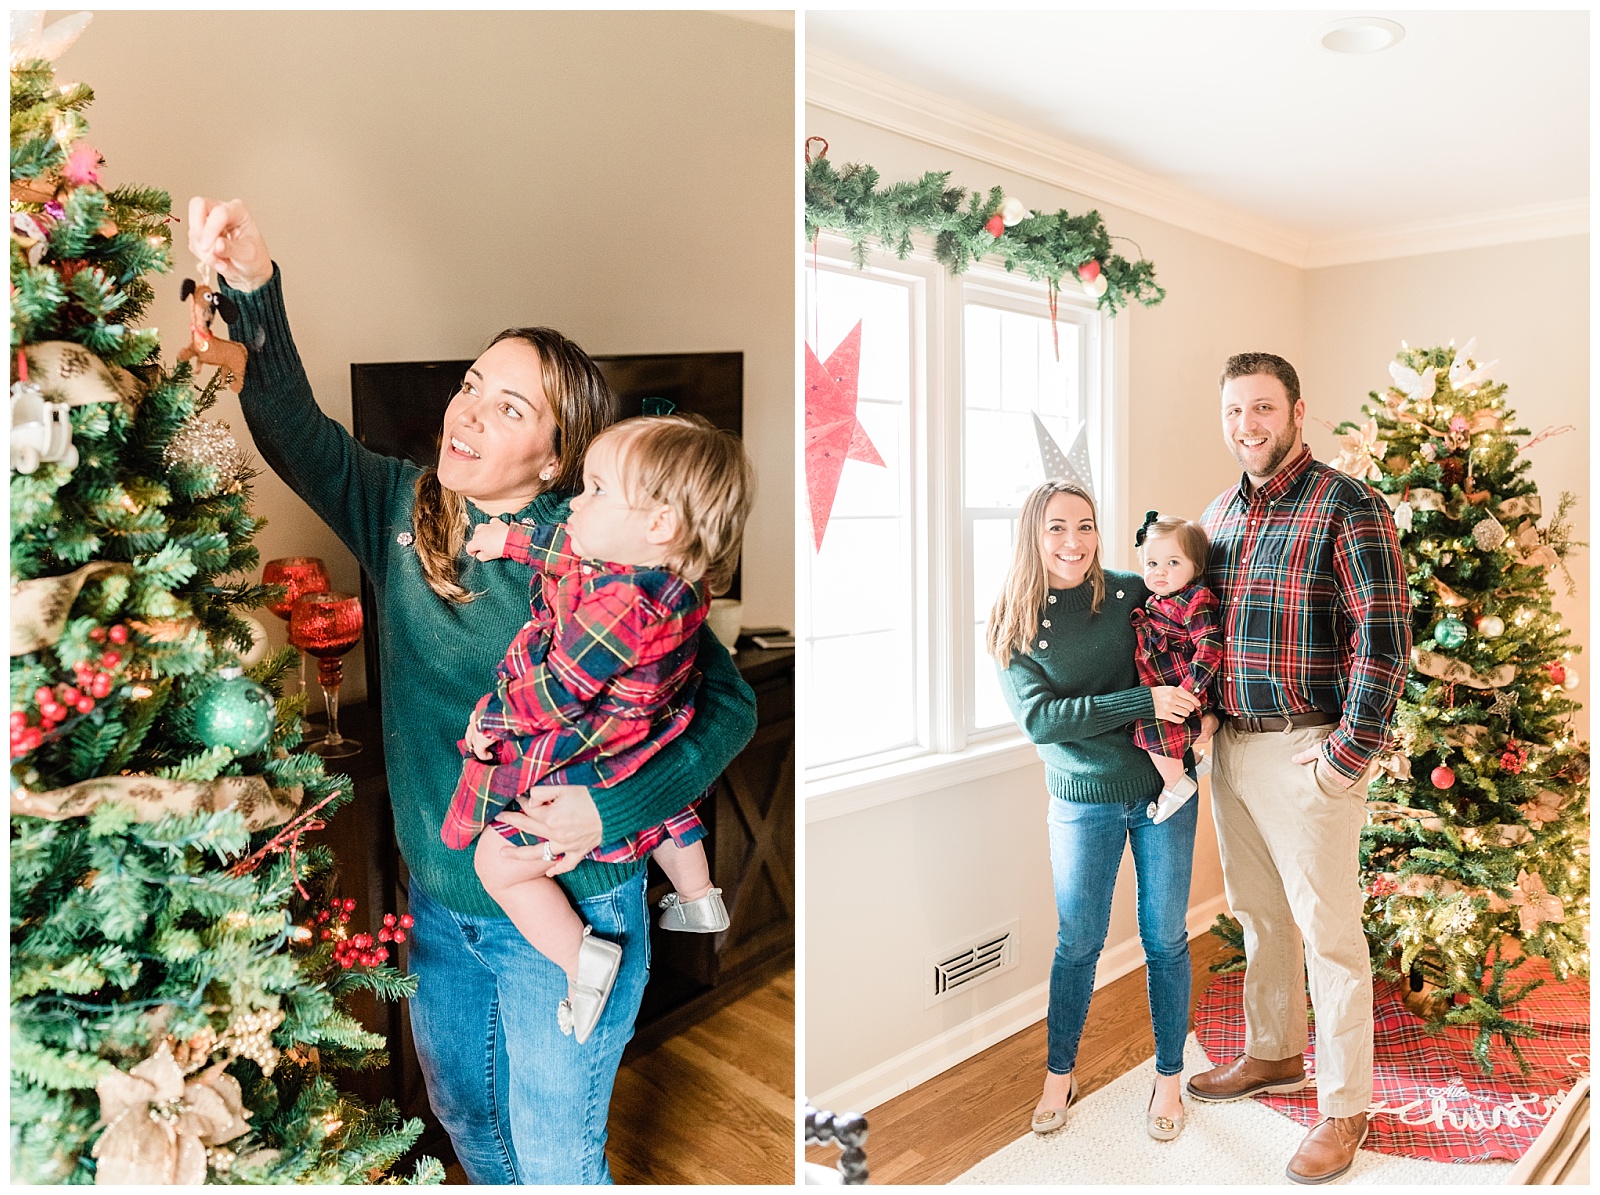 in-home-family-holiday-session-winter-christmas-cozy-photographer-nj-new-jersey-photo_0003.jpg